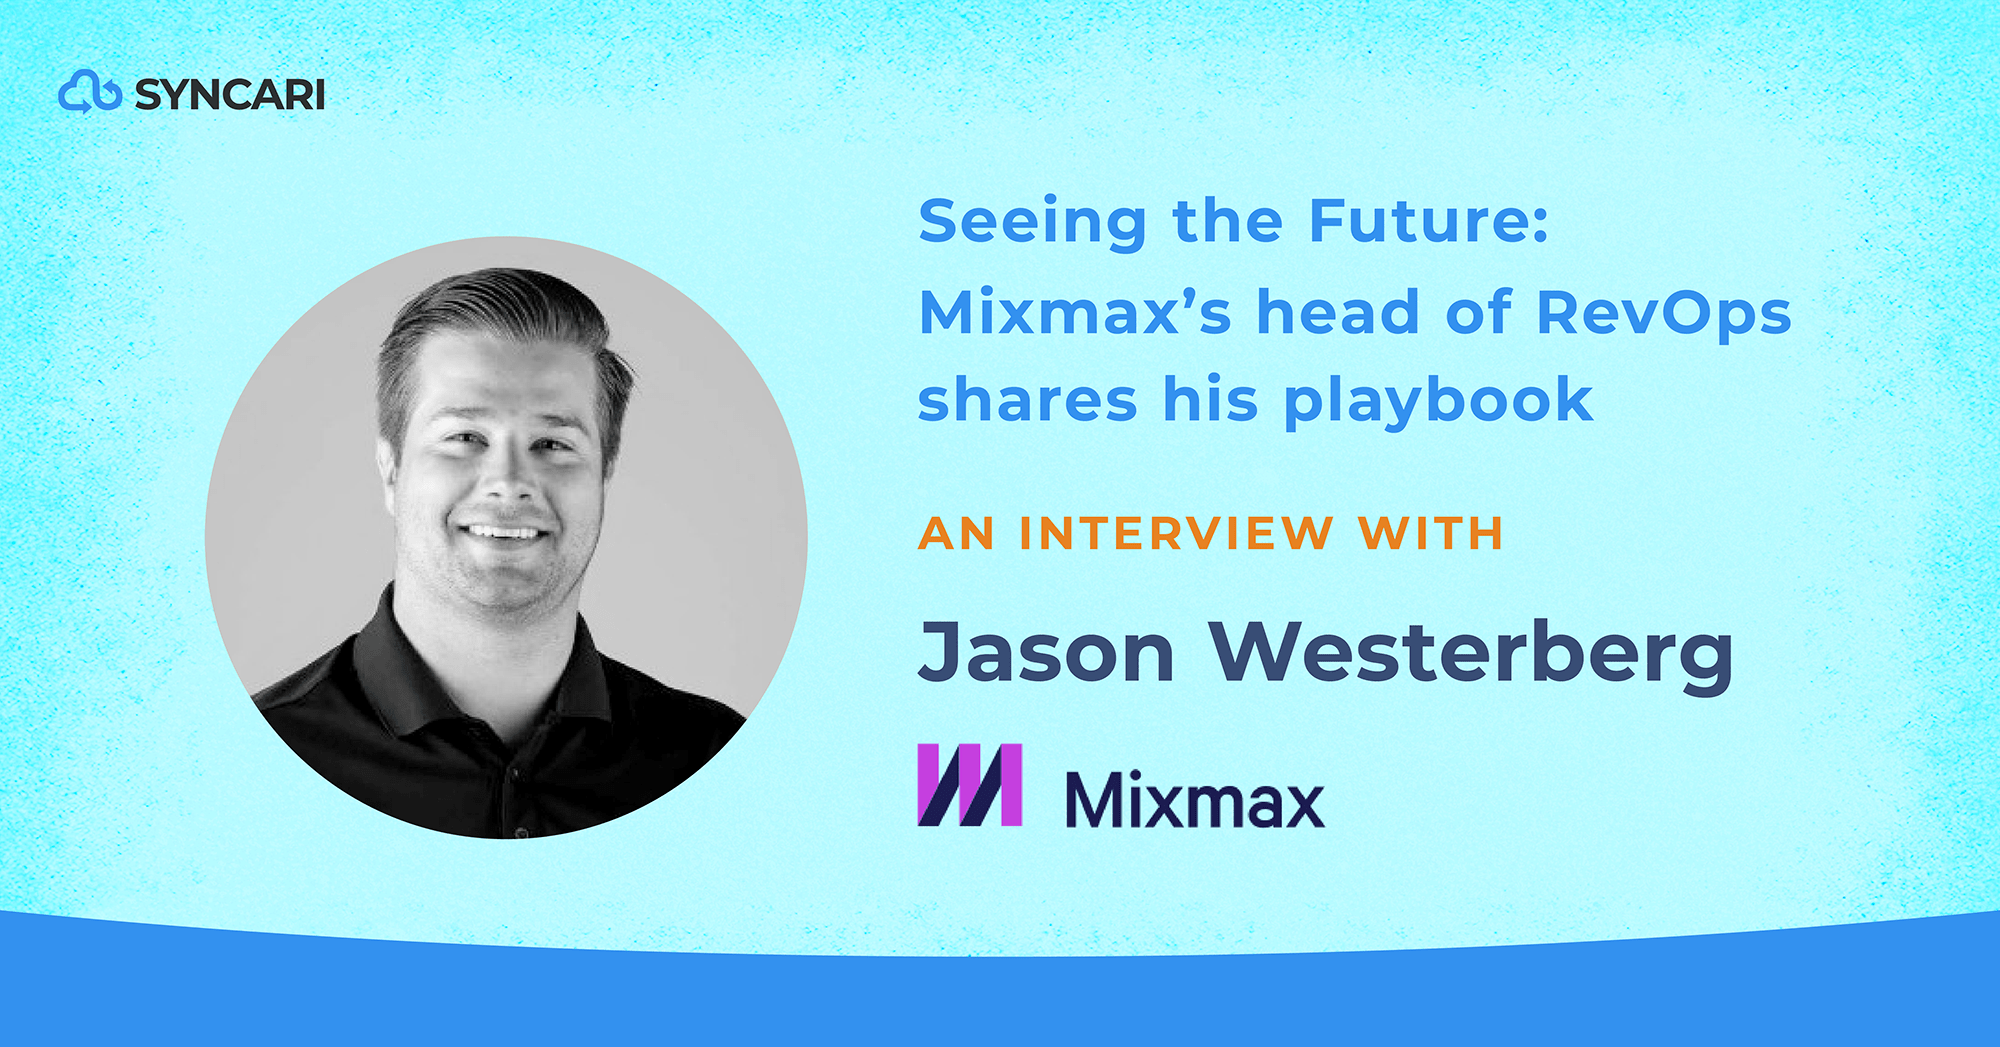 Seeing the future: mixmax's head of revops, Jason Westerberg